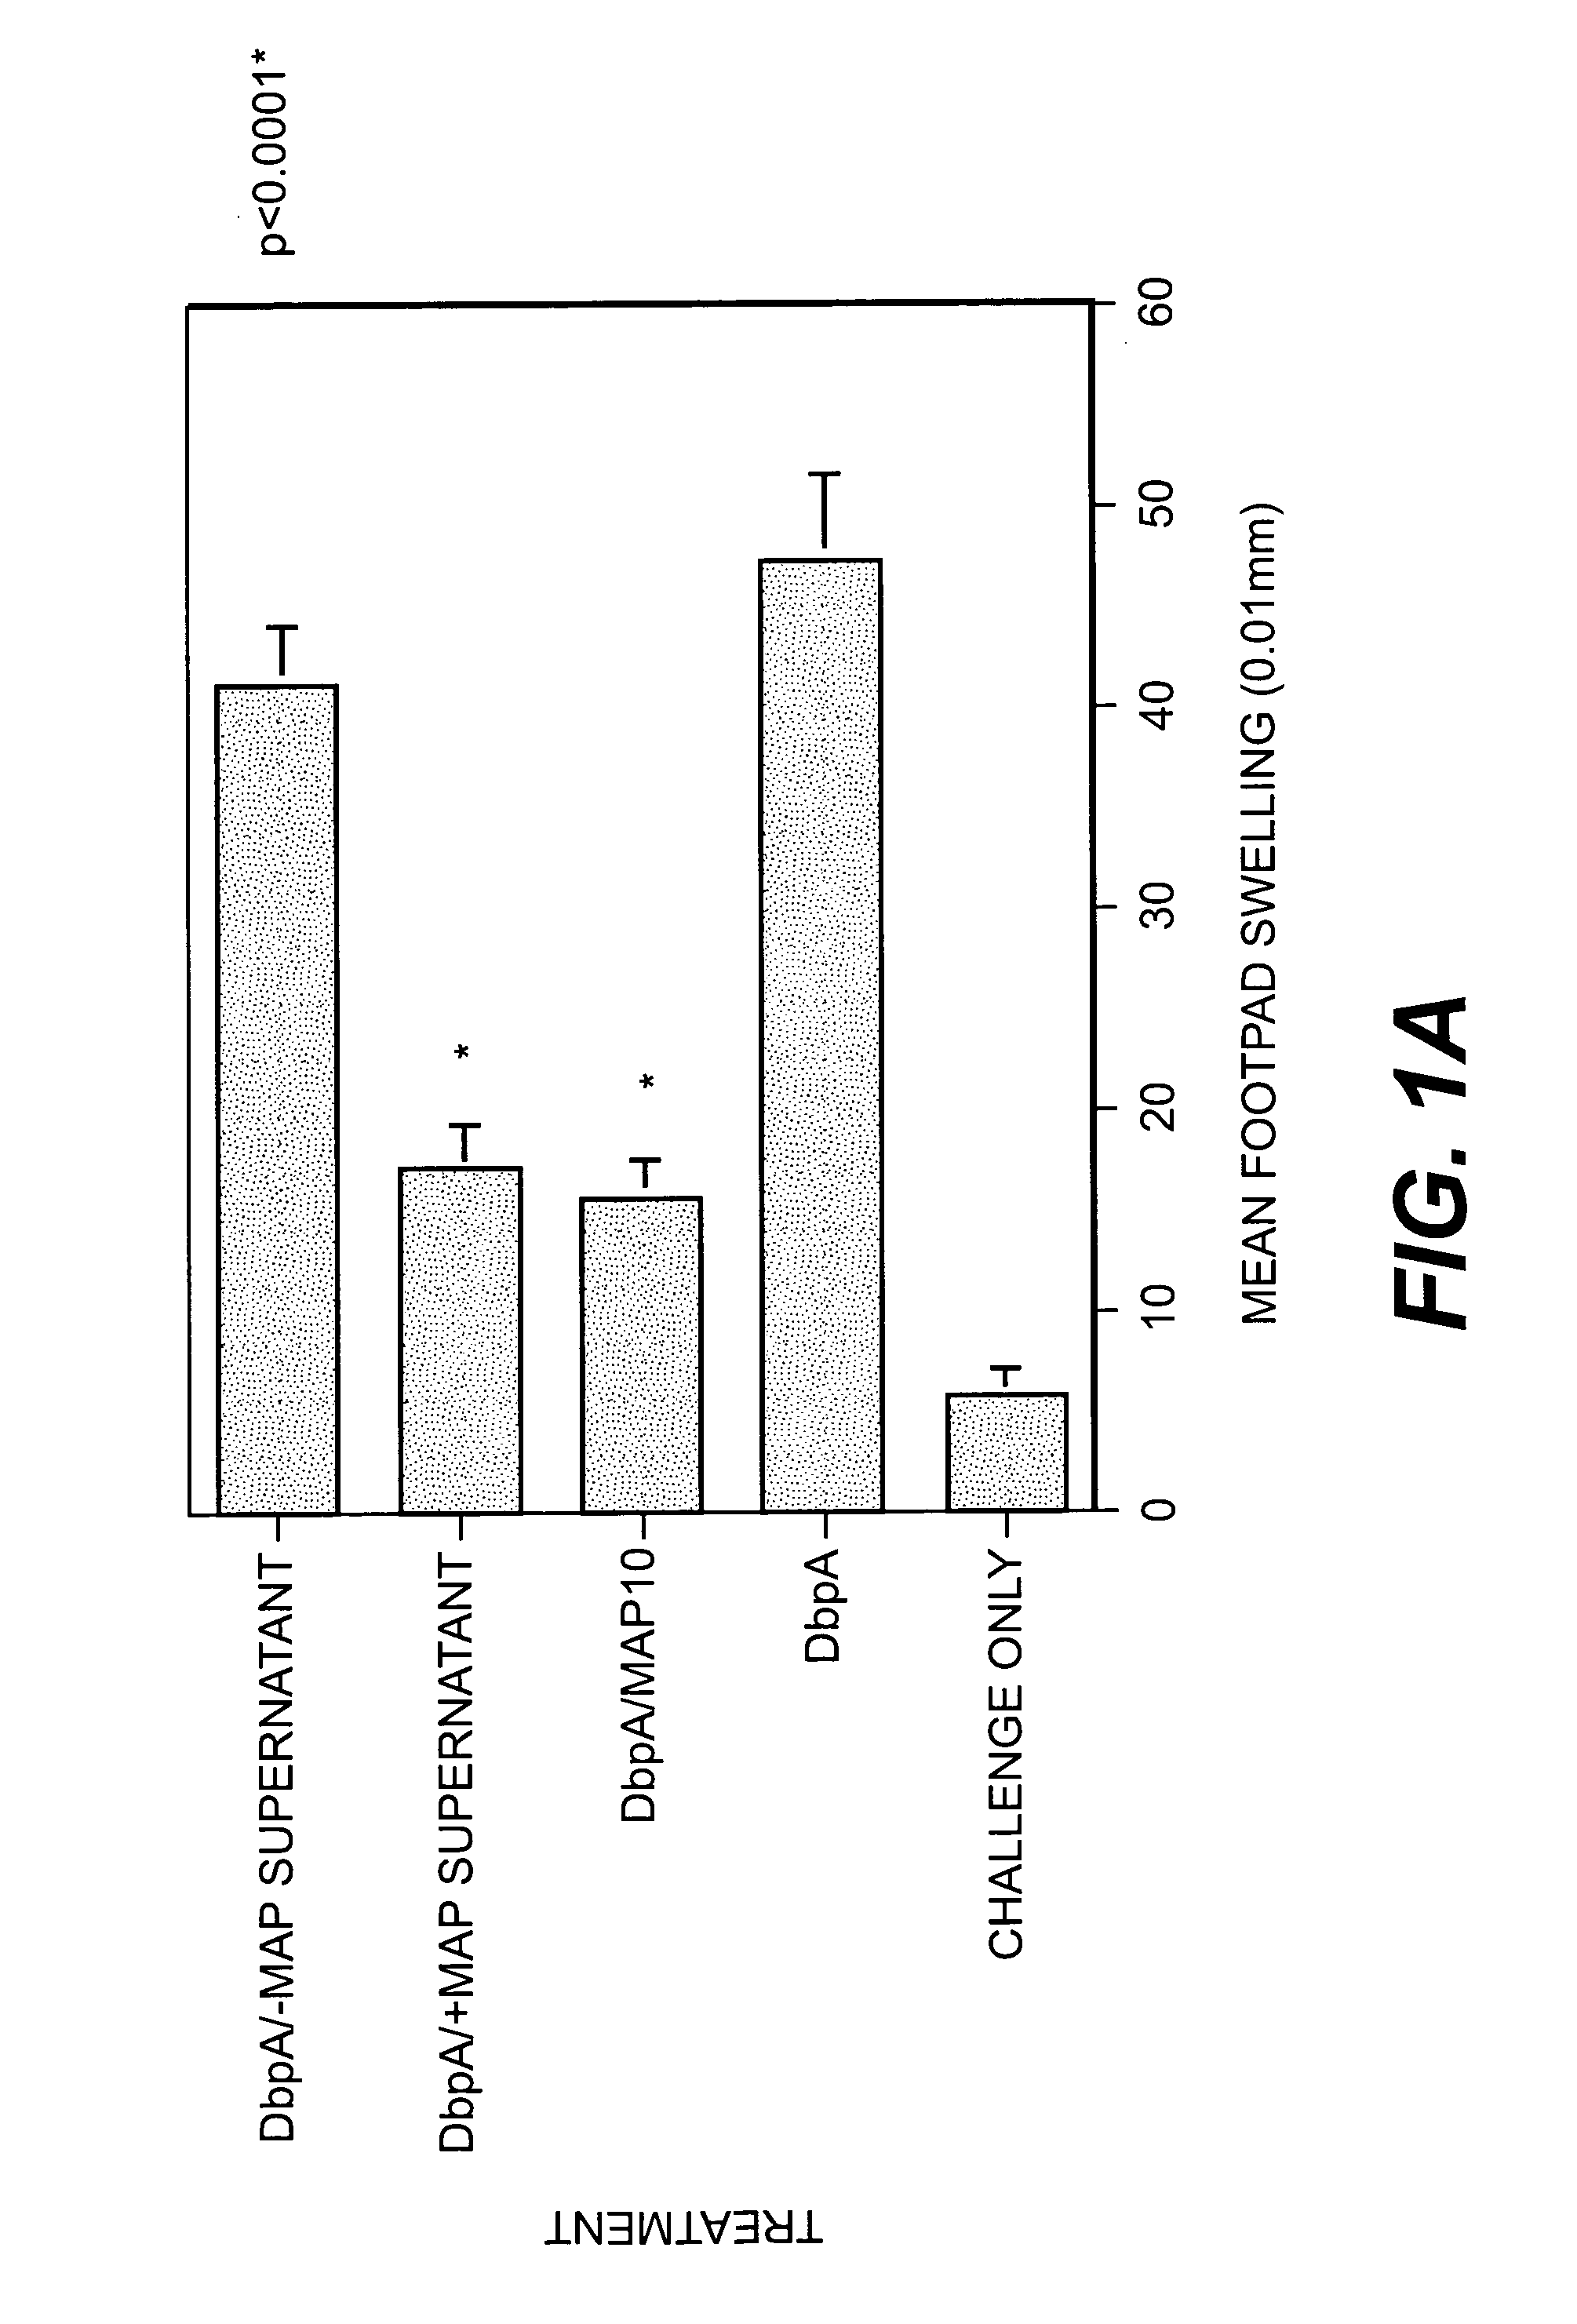 Method of preventing T cell-mediated responses by the use of the major histocompatibility complex class II analog protein (map protein) from <i>Staphylococcus aureus</i>